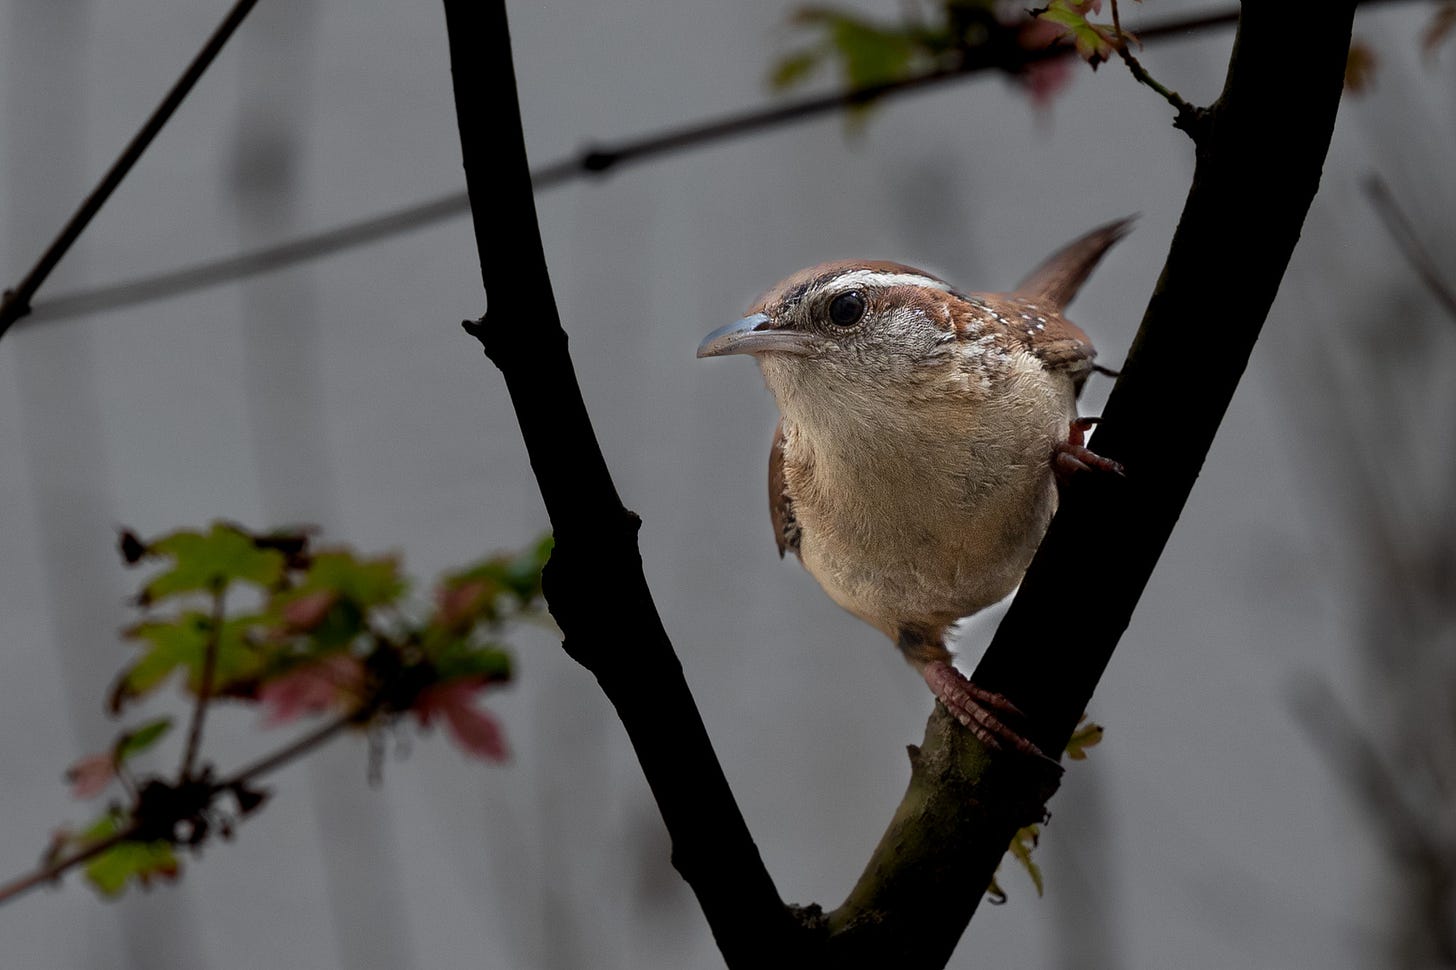 Adult Carolina Wren keeps a watchful eye while sitting on a tree branch.